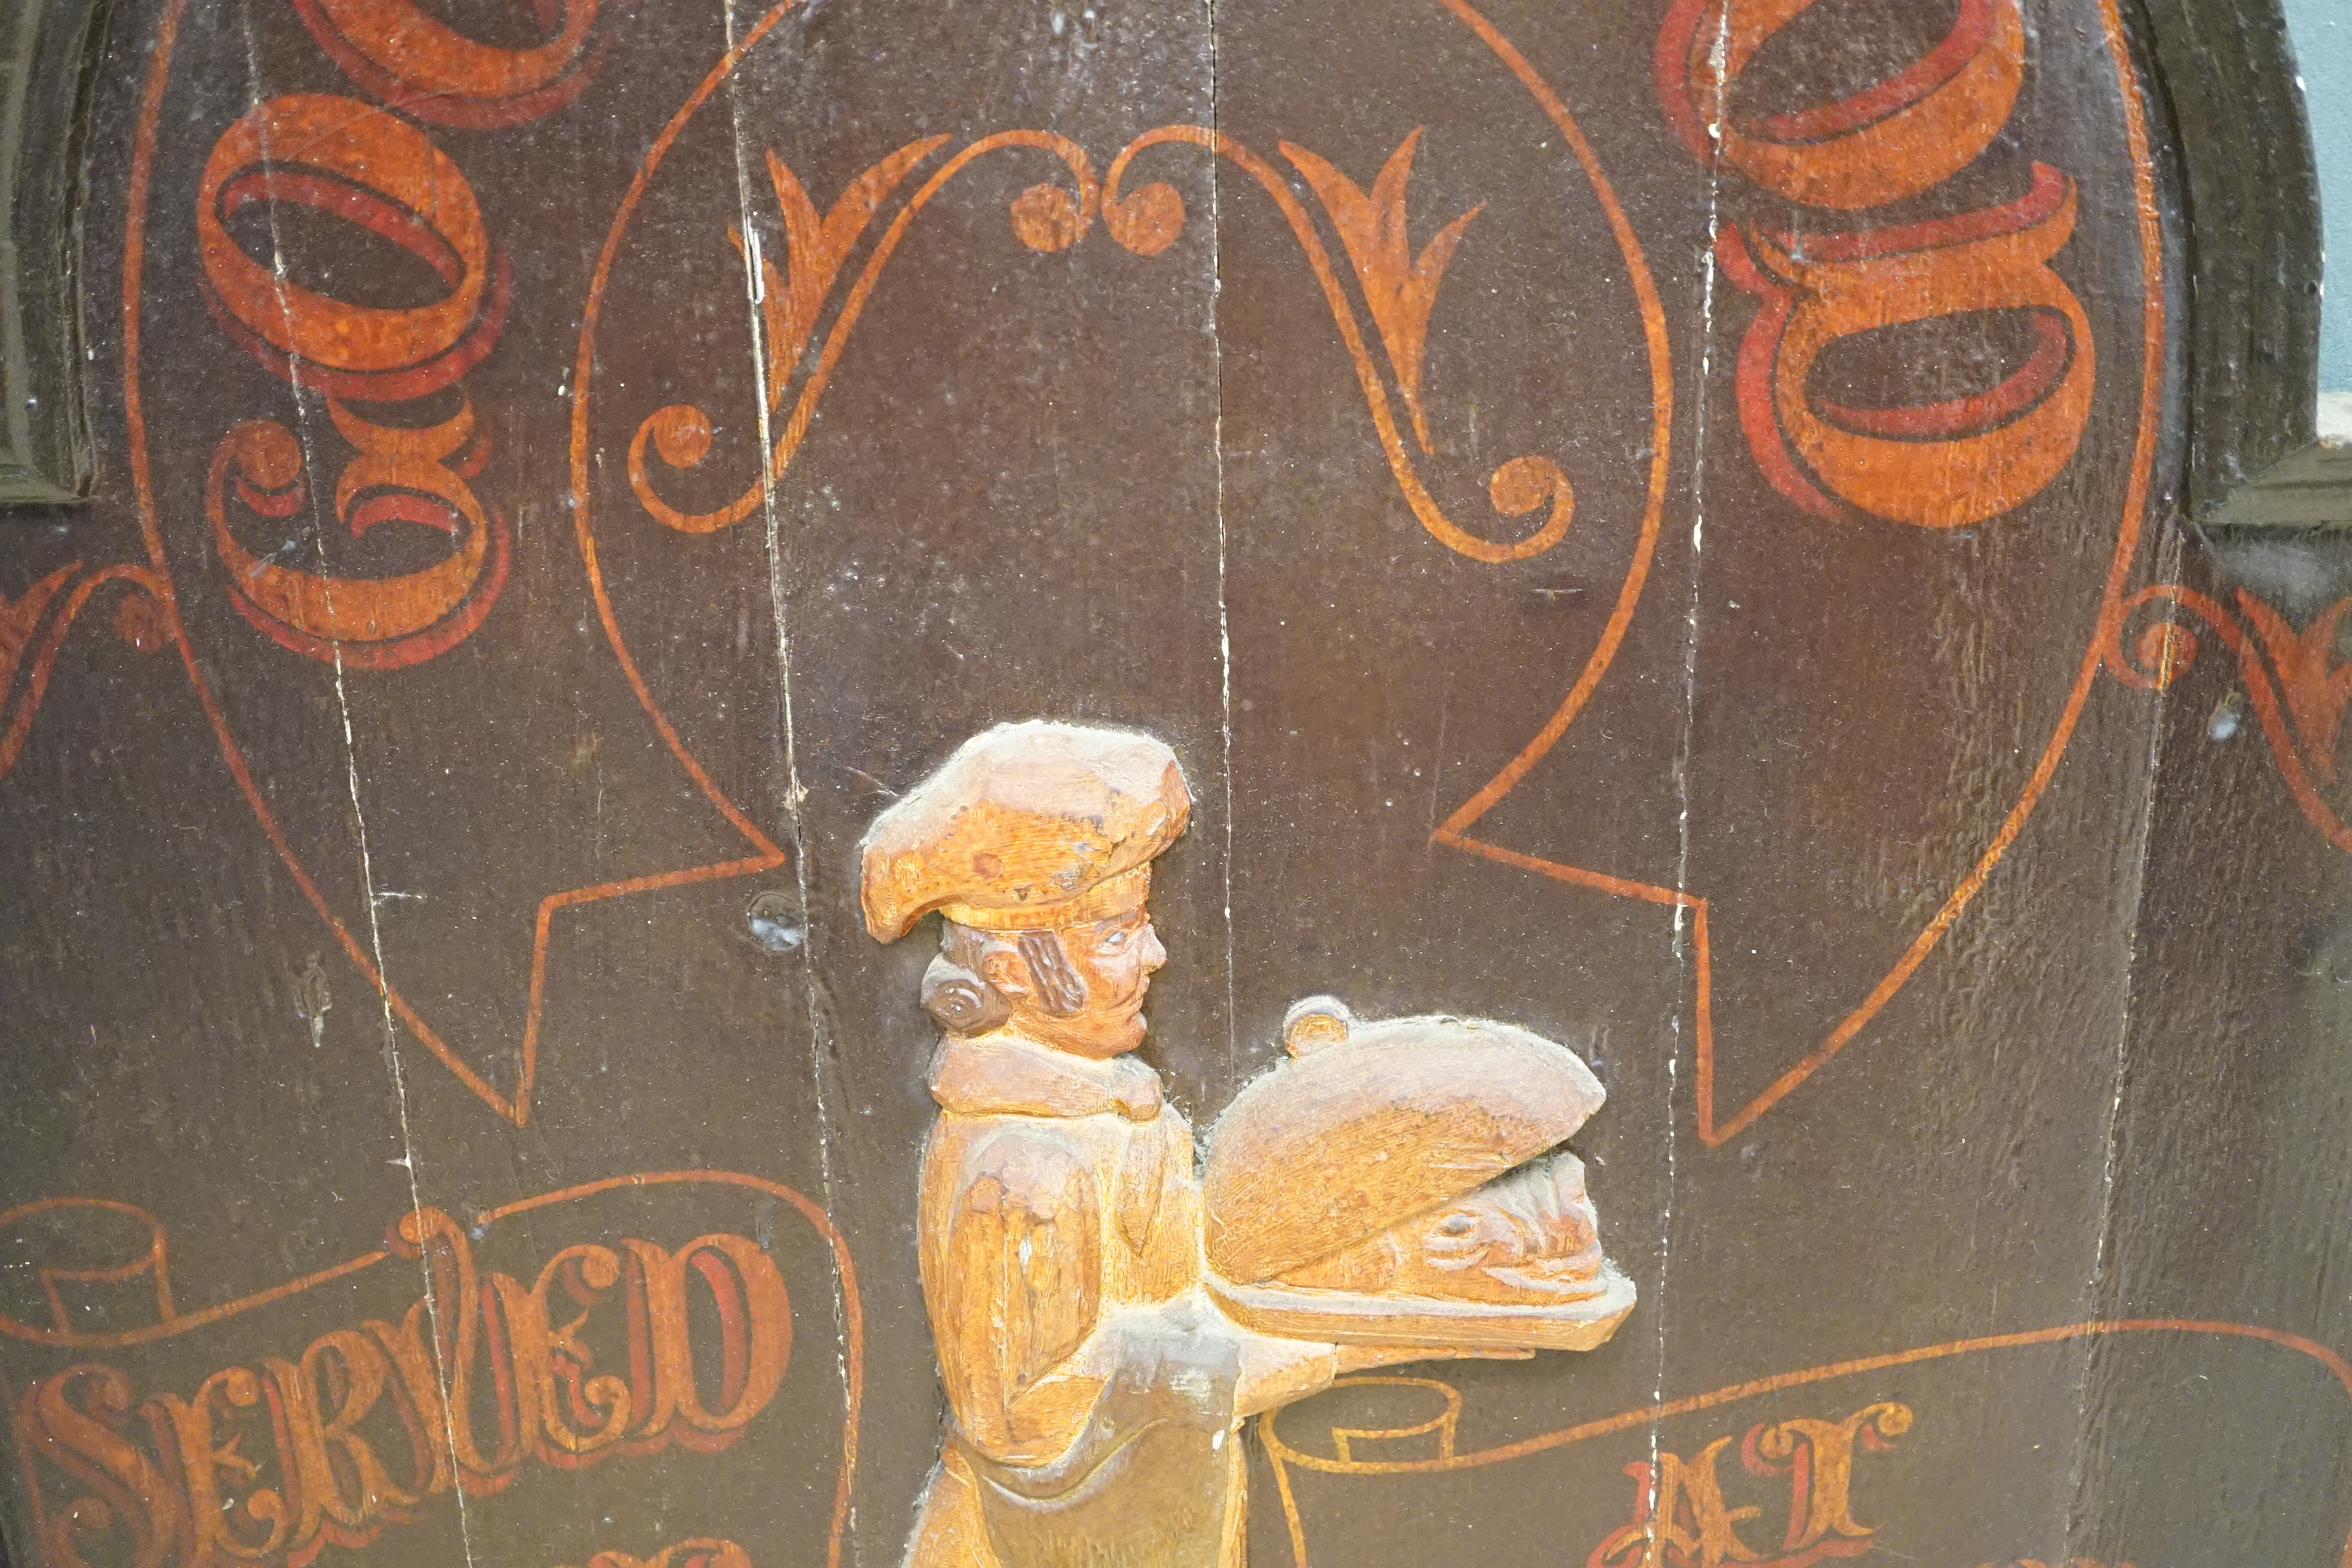 A 'Good Food' painted wood advertising sign, 93 x 74cm